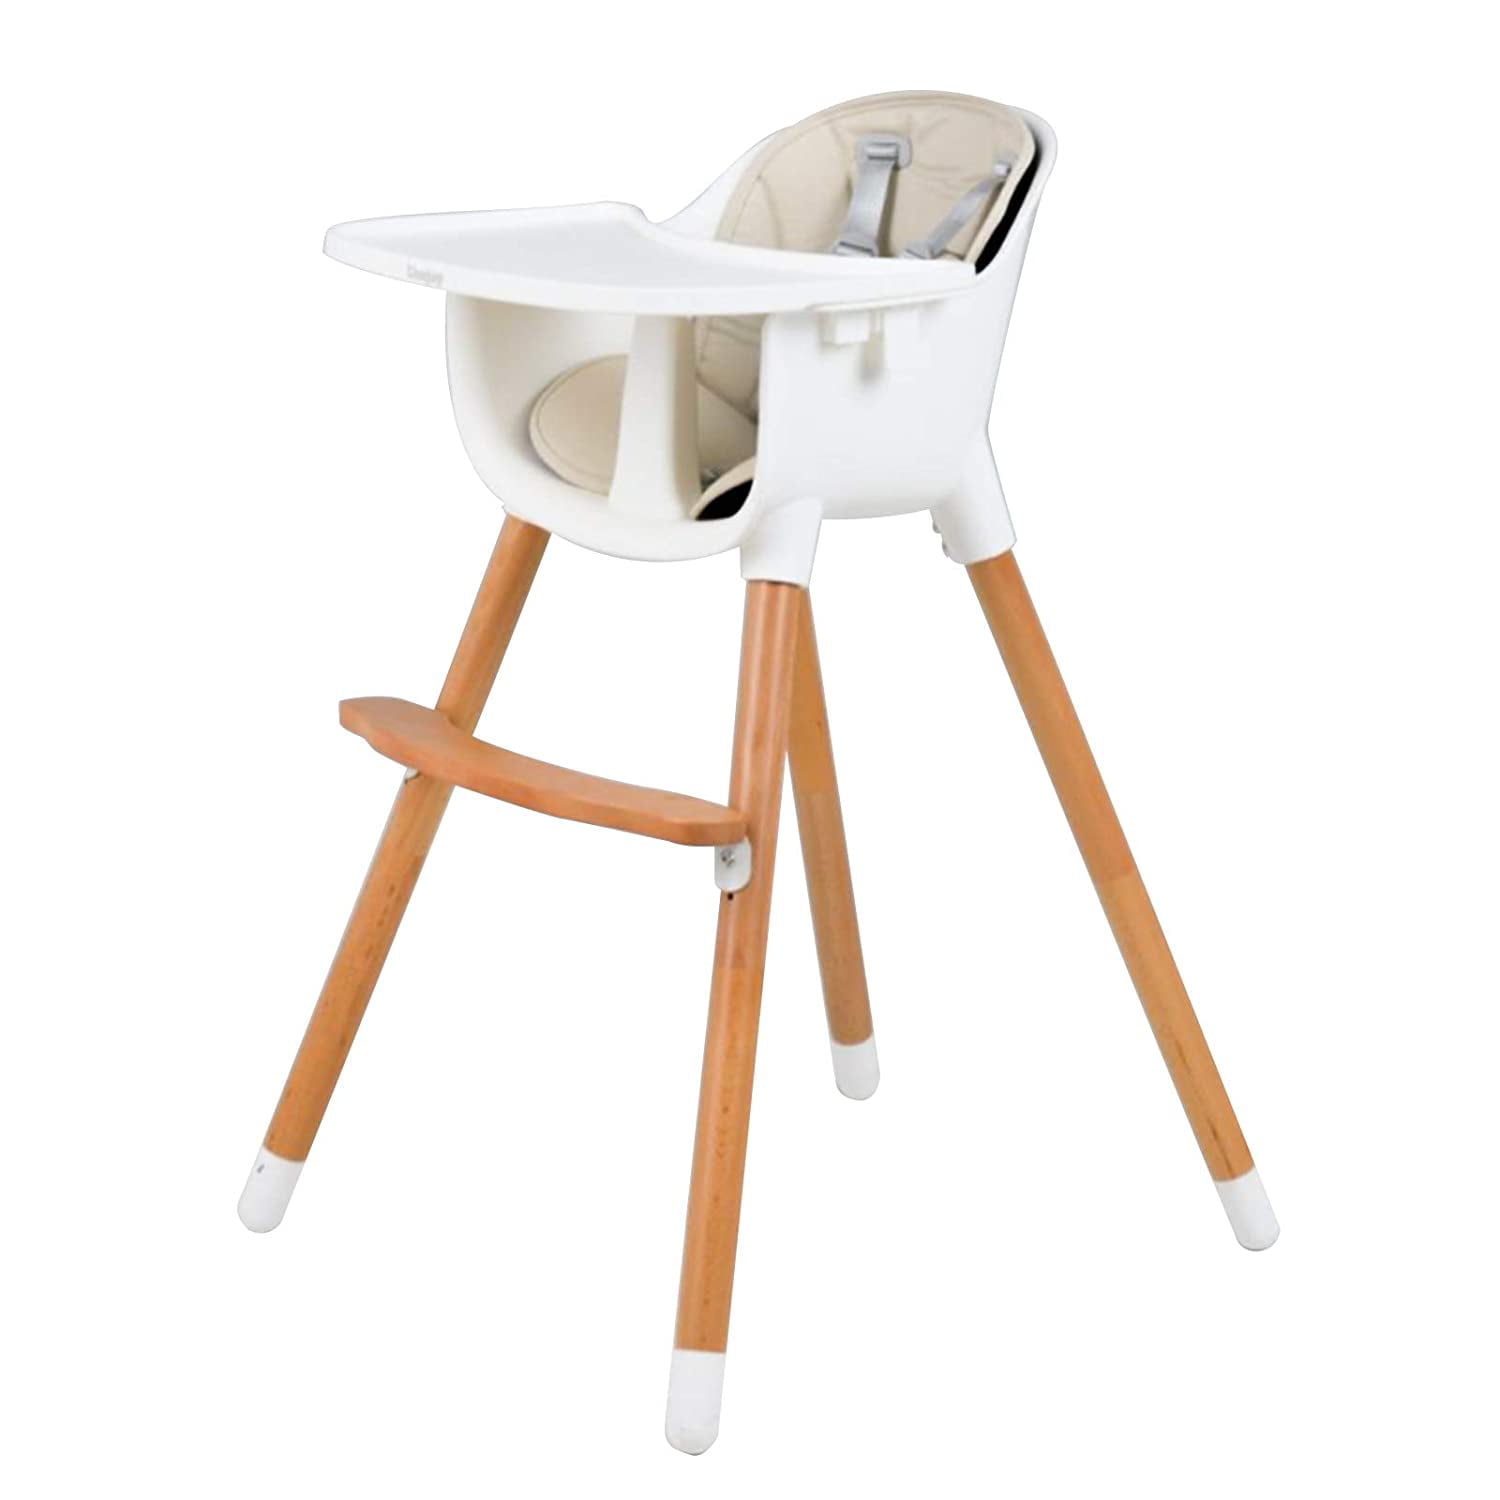 Uenjoy Adjustable Baby High Chair Beech Baby Dining Chair Toddler Feeding Booster Seat With 5 Point Seat Belt Movable Tray Seat Cushion High Quality Material Easy To Install And Clean White Walmart Com